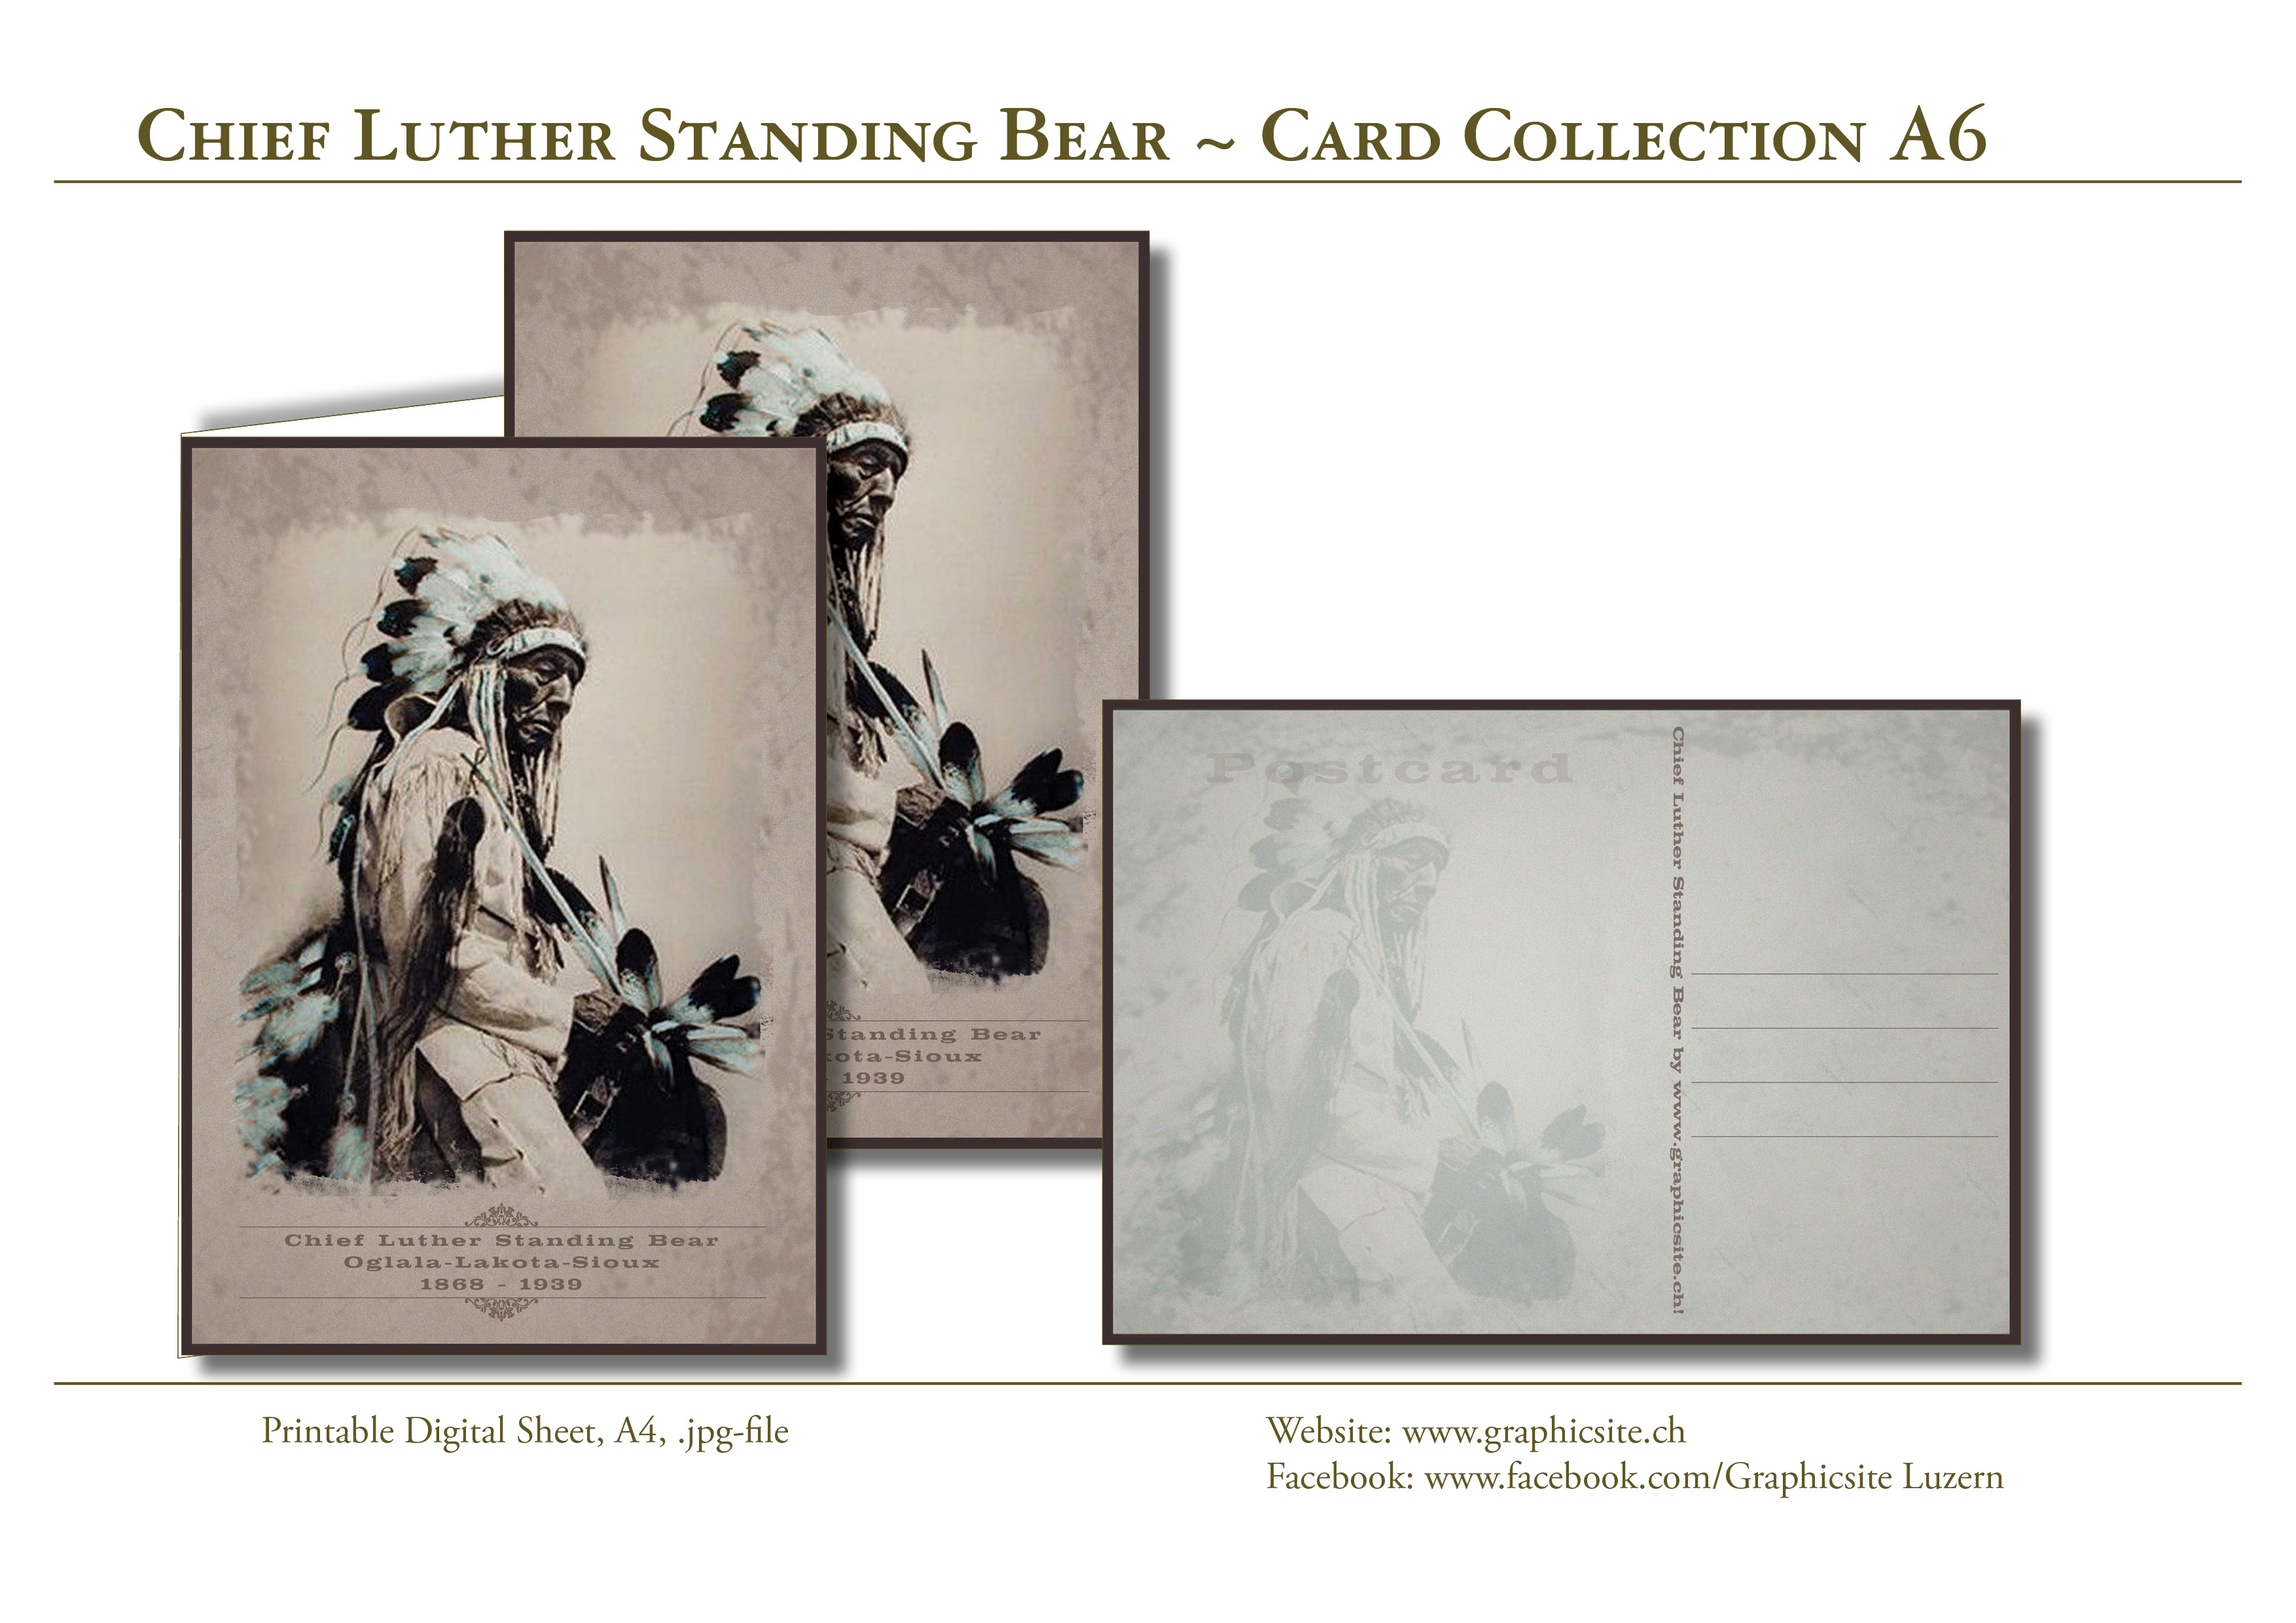 Printable Digital Sheets - Card Collection A6, Greeting Card, Postcard, Native American Indian, Chief, Standing Bear, Graphic Design, Luzern,